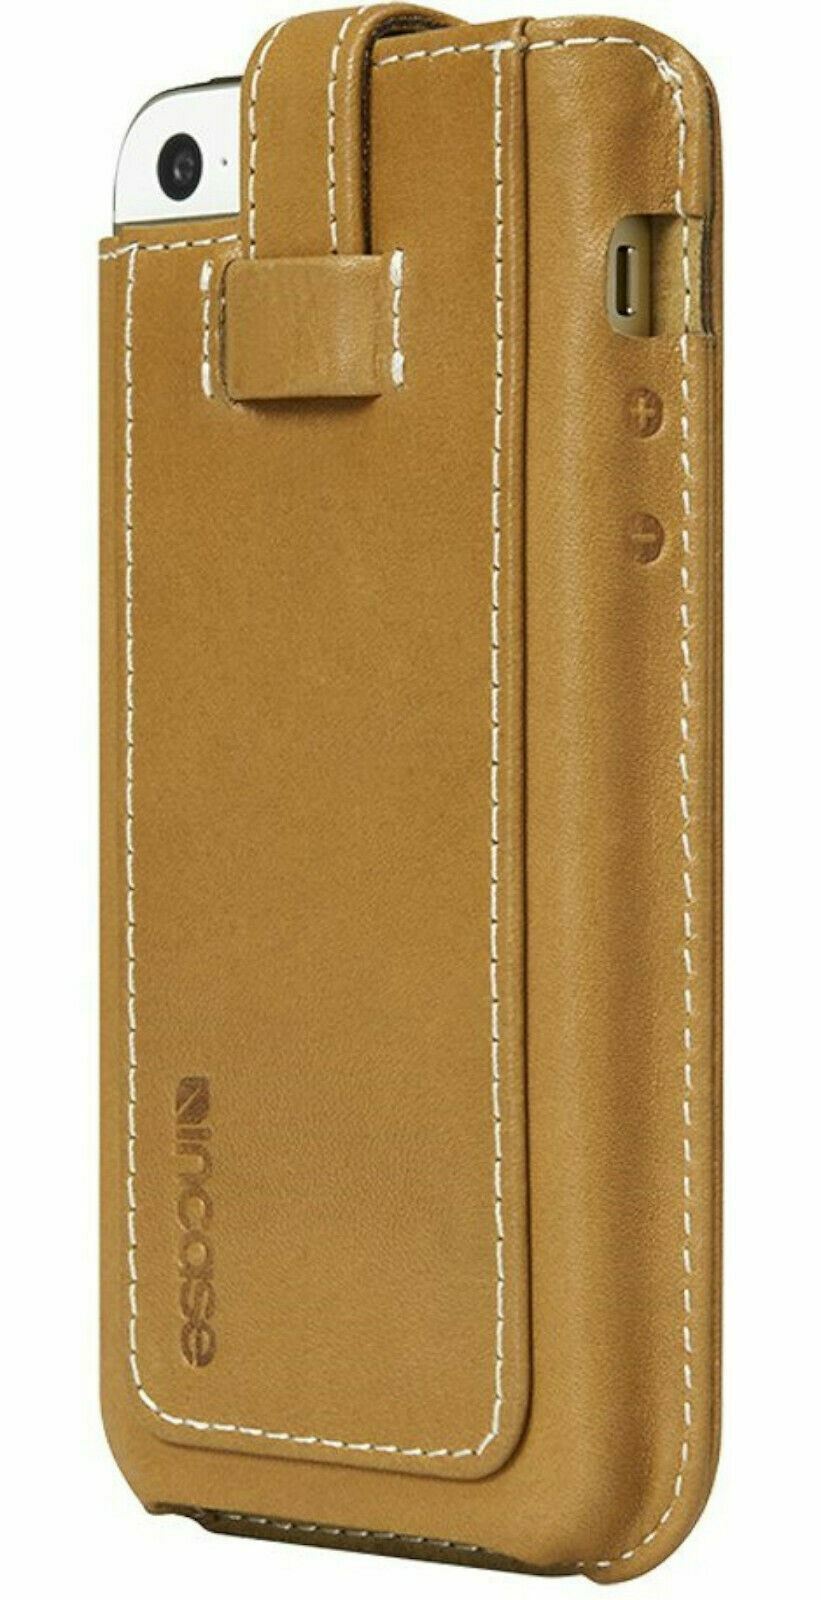 NEW Incase Leather Fitted Sleeve TAN/BROWN ES89059 for Apple iPhone 5s/5c/5 - $10.30